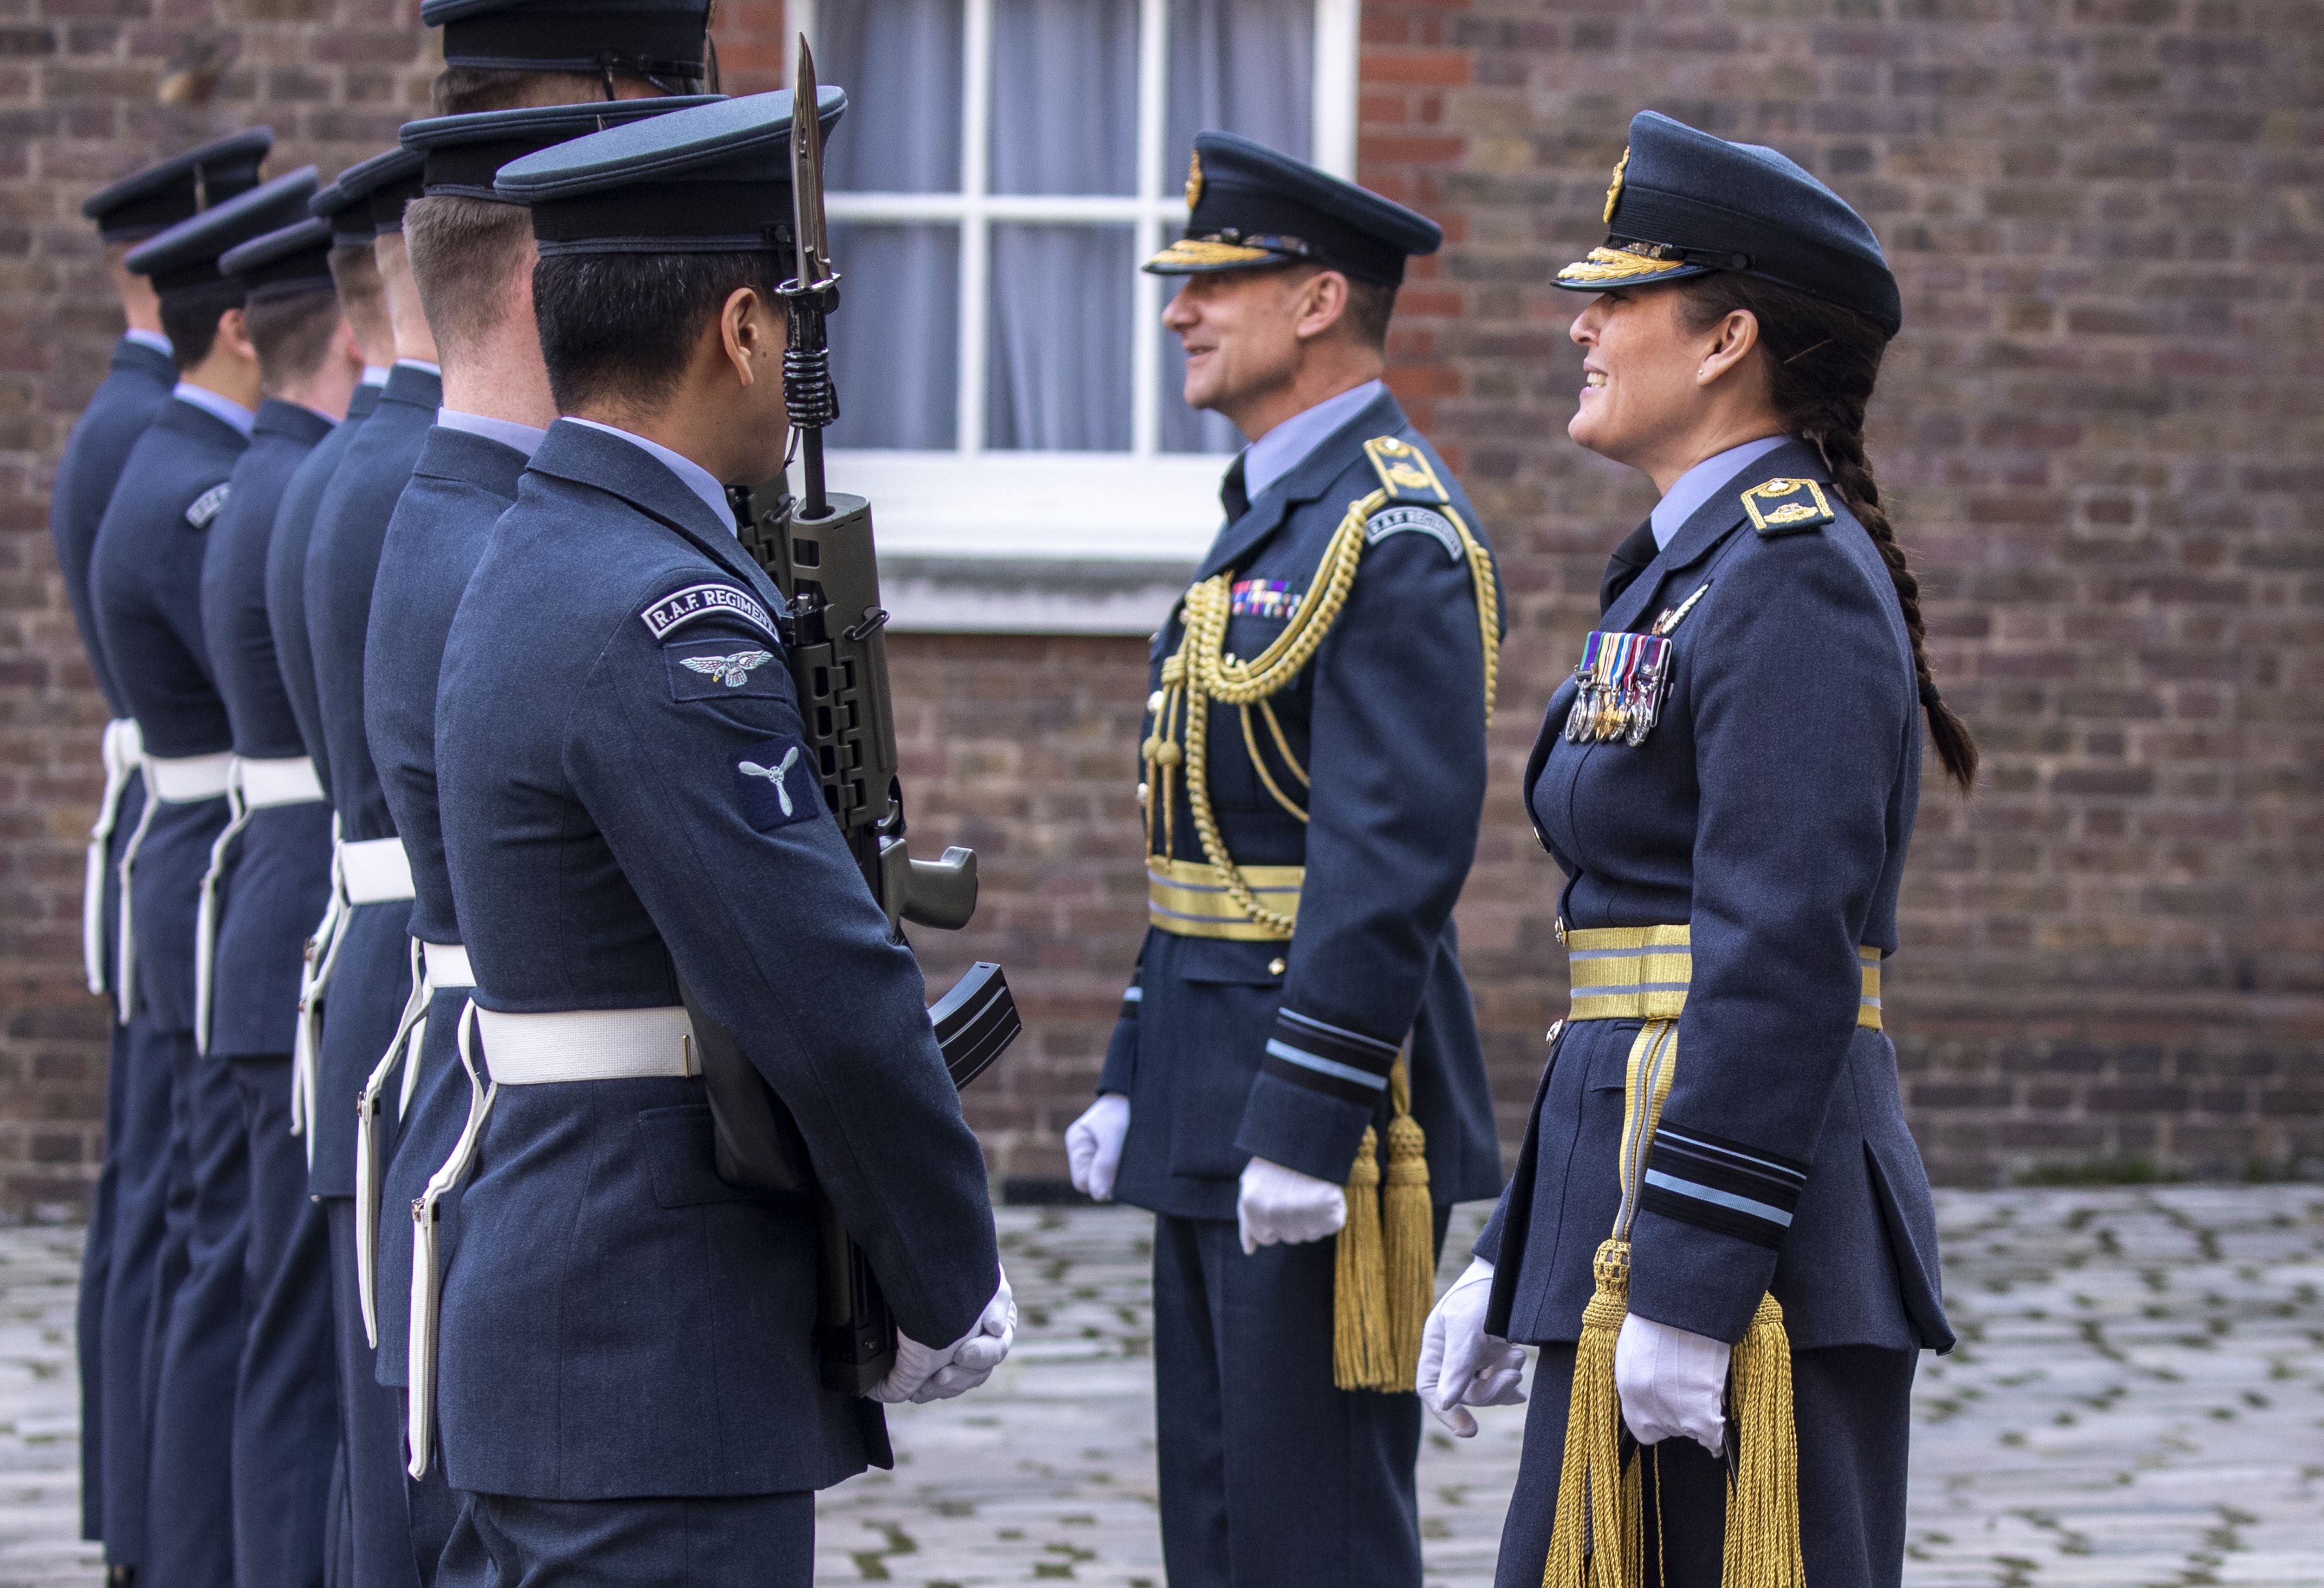 Personnel smile in front of the Queen's Colour Squadron on parade.